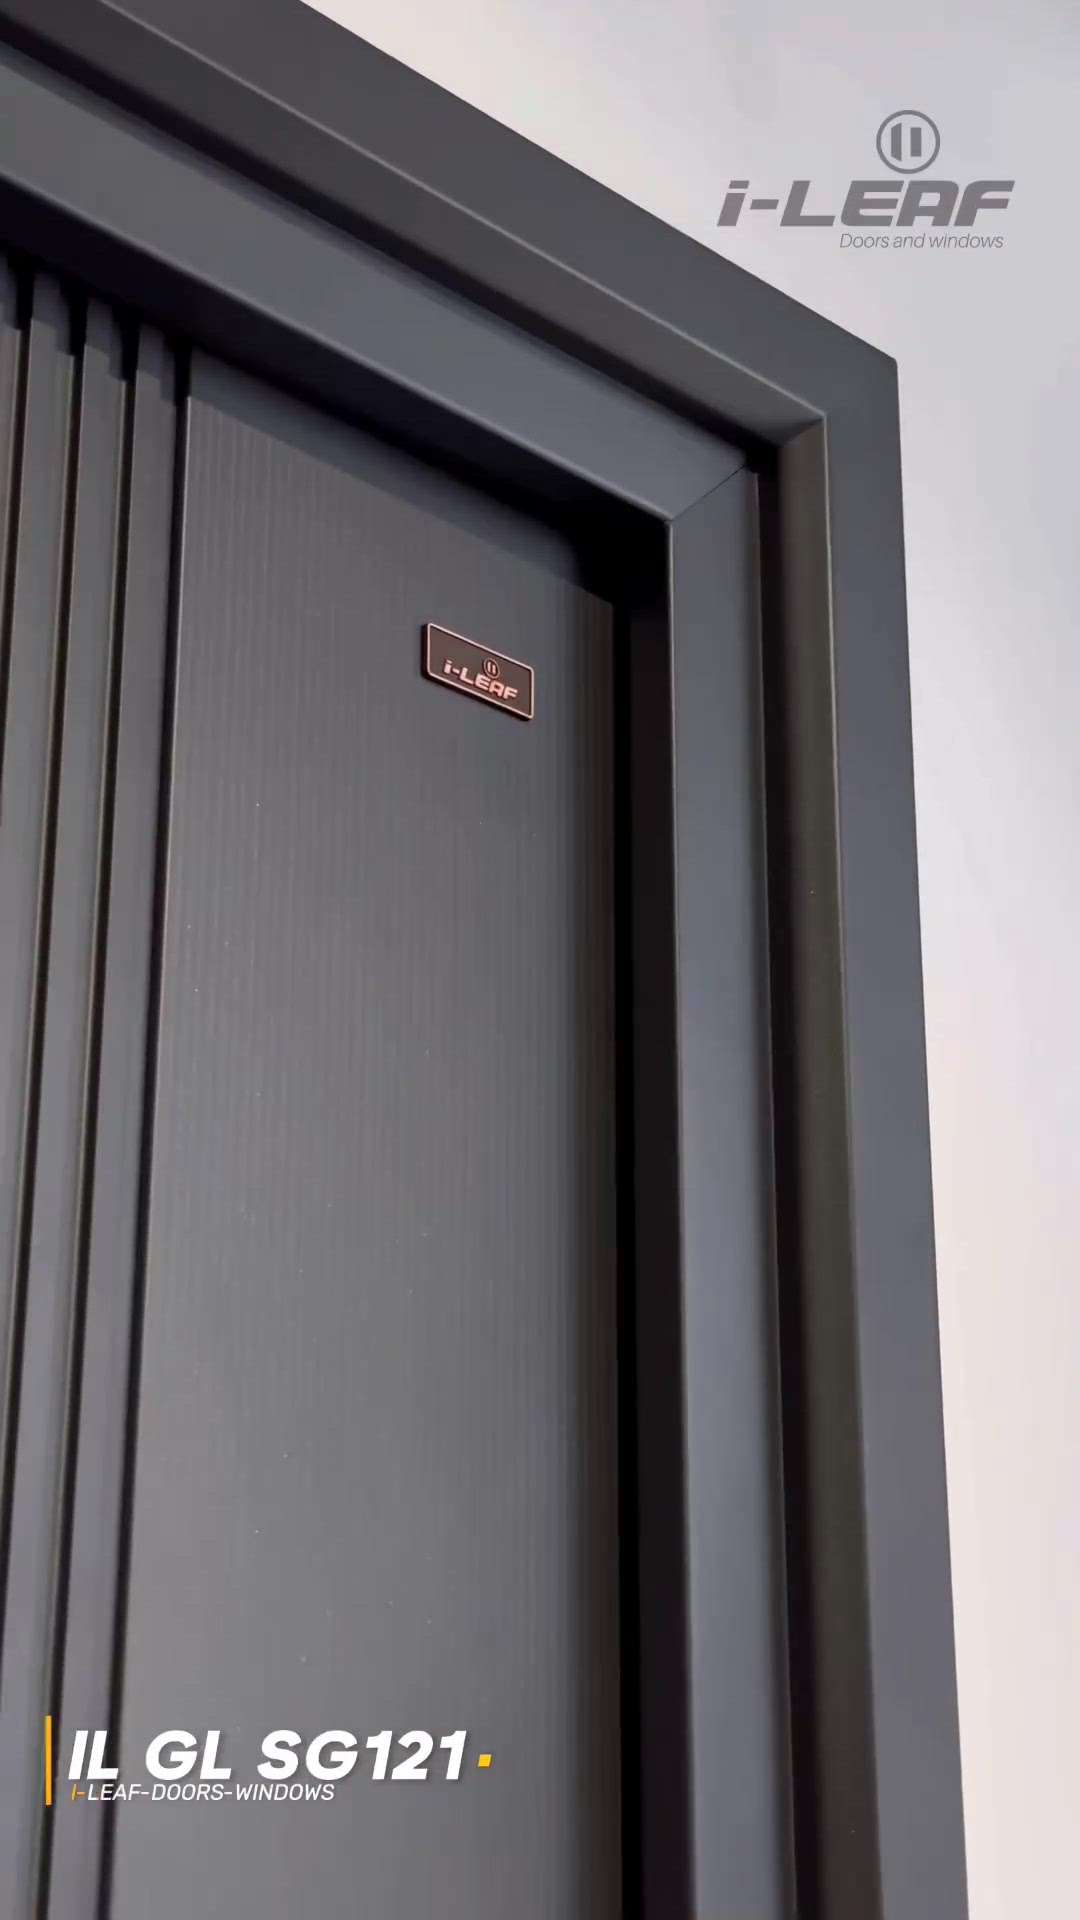 IL GL SG121

🚪Upgrade your home's safety and style with i-Leaf Steel Doors!

Crafted with high-quality, UV-protected Galvalume sheets, these doors offer unmatched strength and weather resistance.

Our state-of-the-art locking systems and heavy-duty hinges provide maximum security, while the stunning woodgrain textures and elegant matte finish add a touch of luxury.

Enjoy lasting beauty with our special colour guard and UV-resistant protection.

Choose i-Leaf Doors for superior protection and peace of mind.

#iLeafDoors #SteelDoorsandWindows #securitydoors #Homesecurity #HomeDecor #doorsandwindows #SteelDoors #DoubleDoors #steeldoordesign #steelsafetydoor #beststeeldoor #securitydoor #homedoor #classicdoor #longlasting #superiorquality #qualitysteel #bestdoors #doorshop #safetydoor #qualitydoors #affordabledoors #bestdoorever